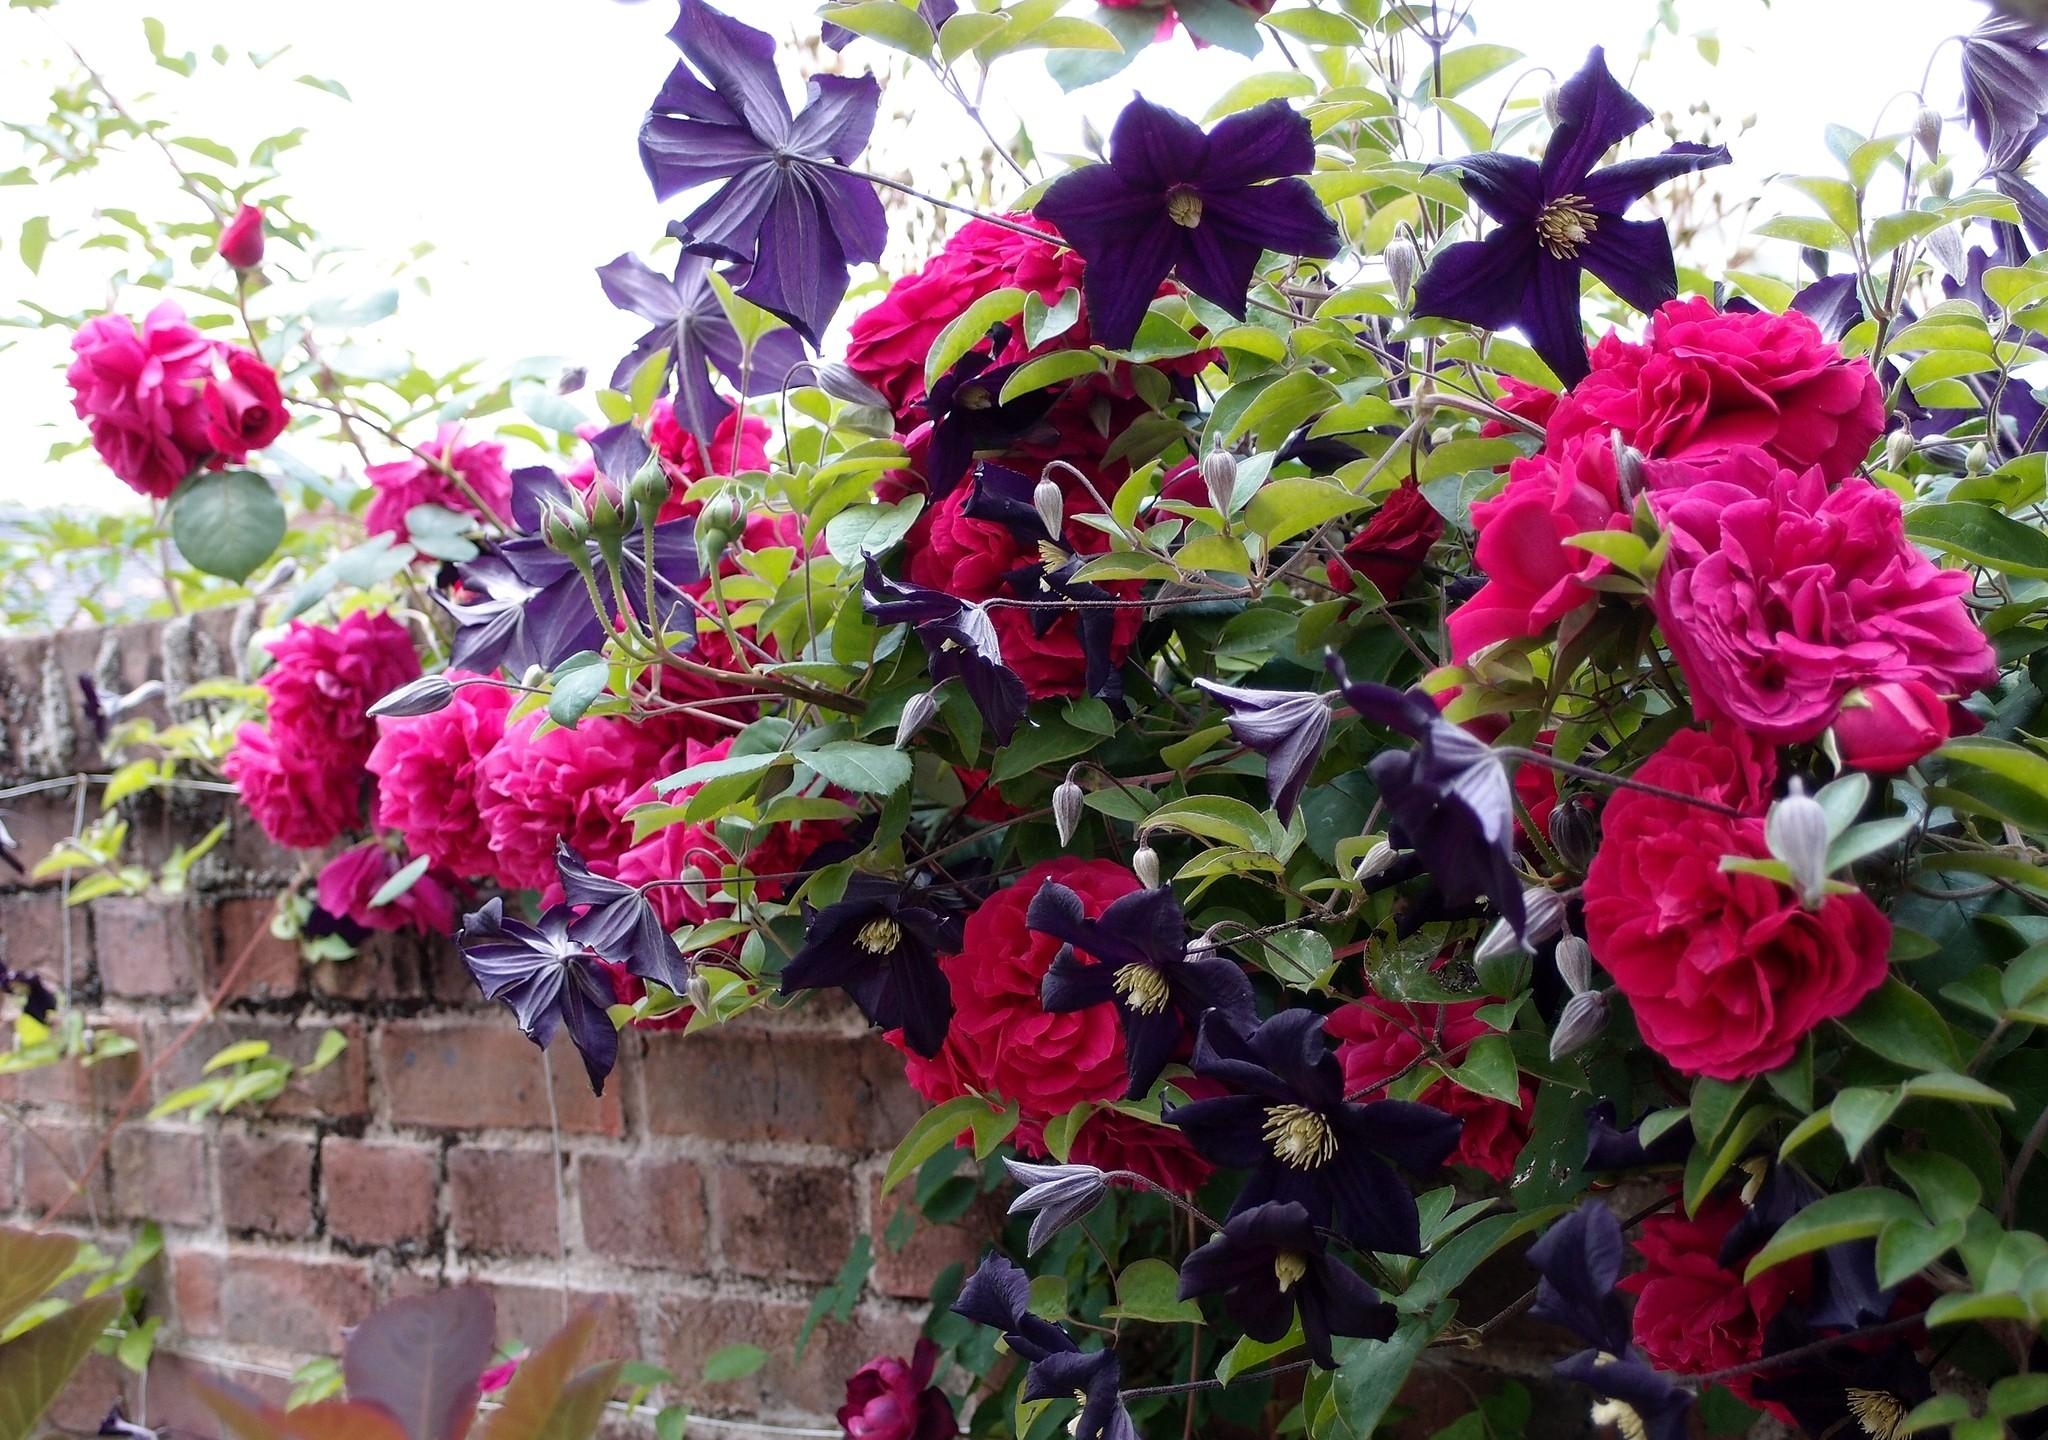 Widescreen image fence, roses, wall, flowers